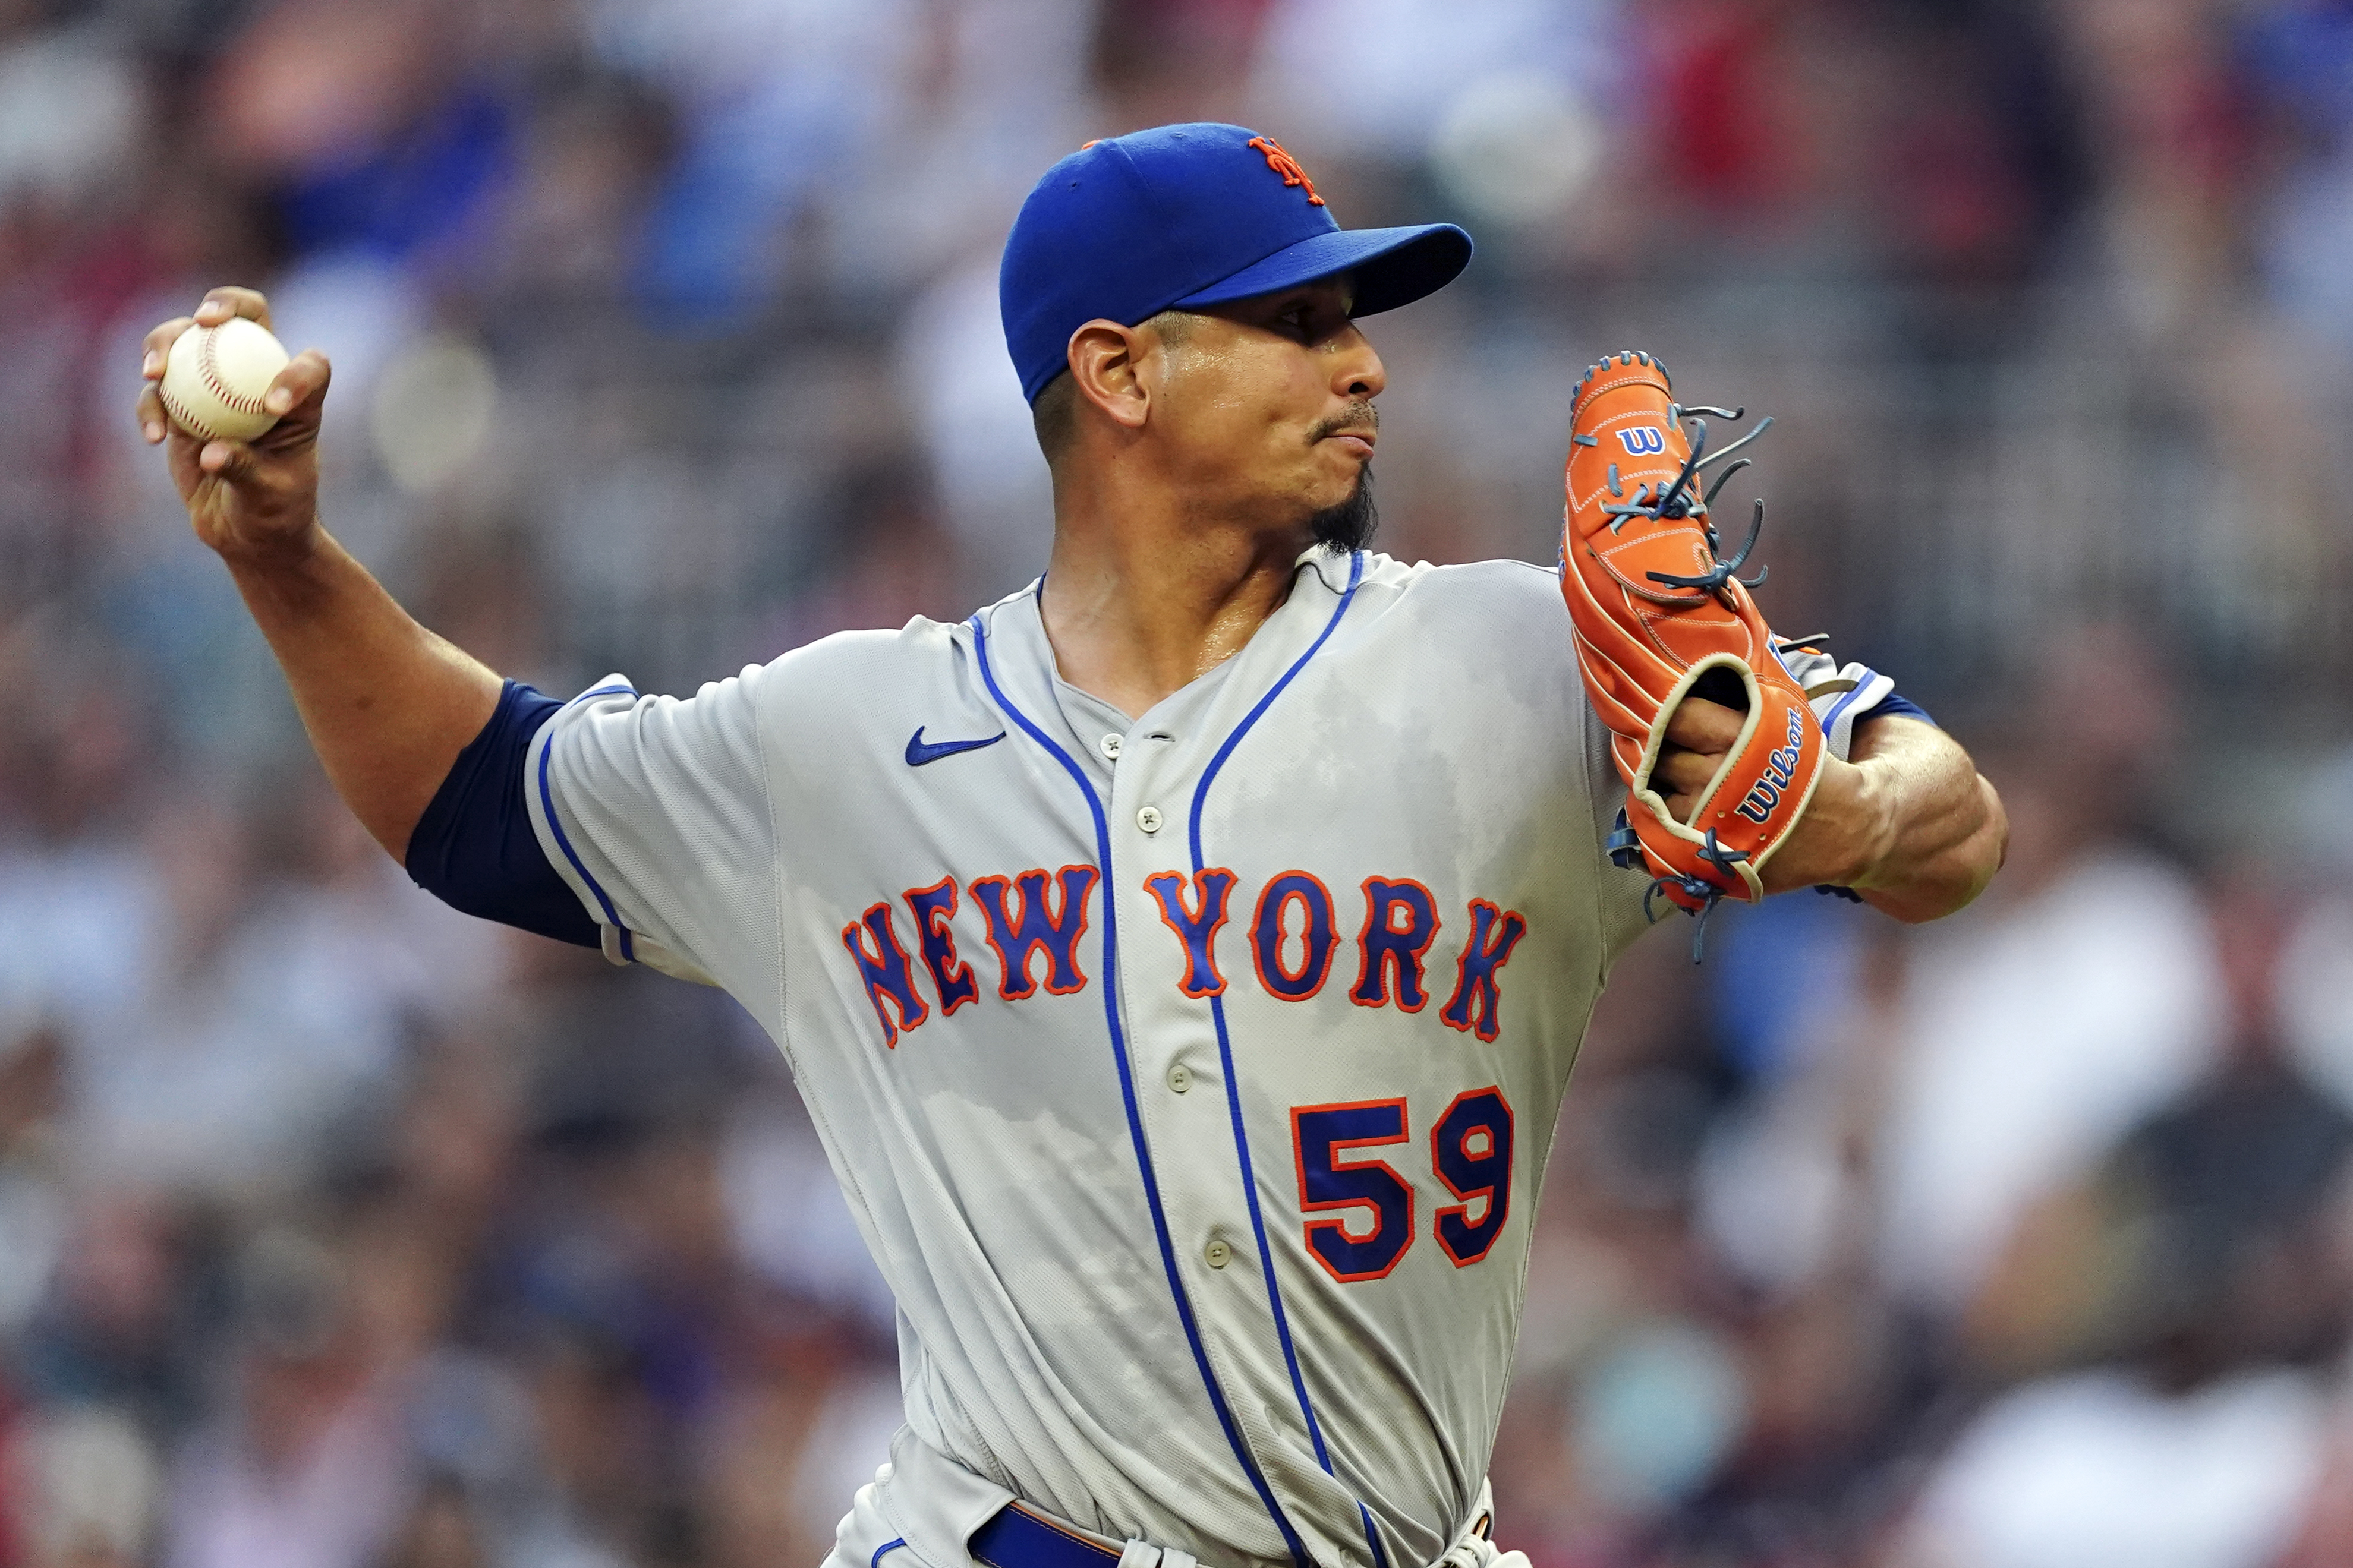 Mets' Edwin Díaz 'Recovering Pretty Fast' from Knee Injury